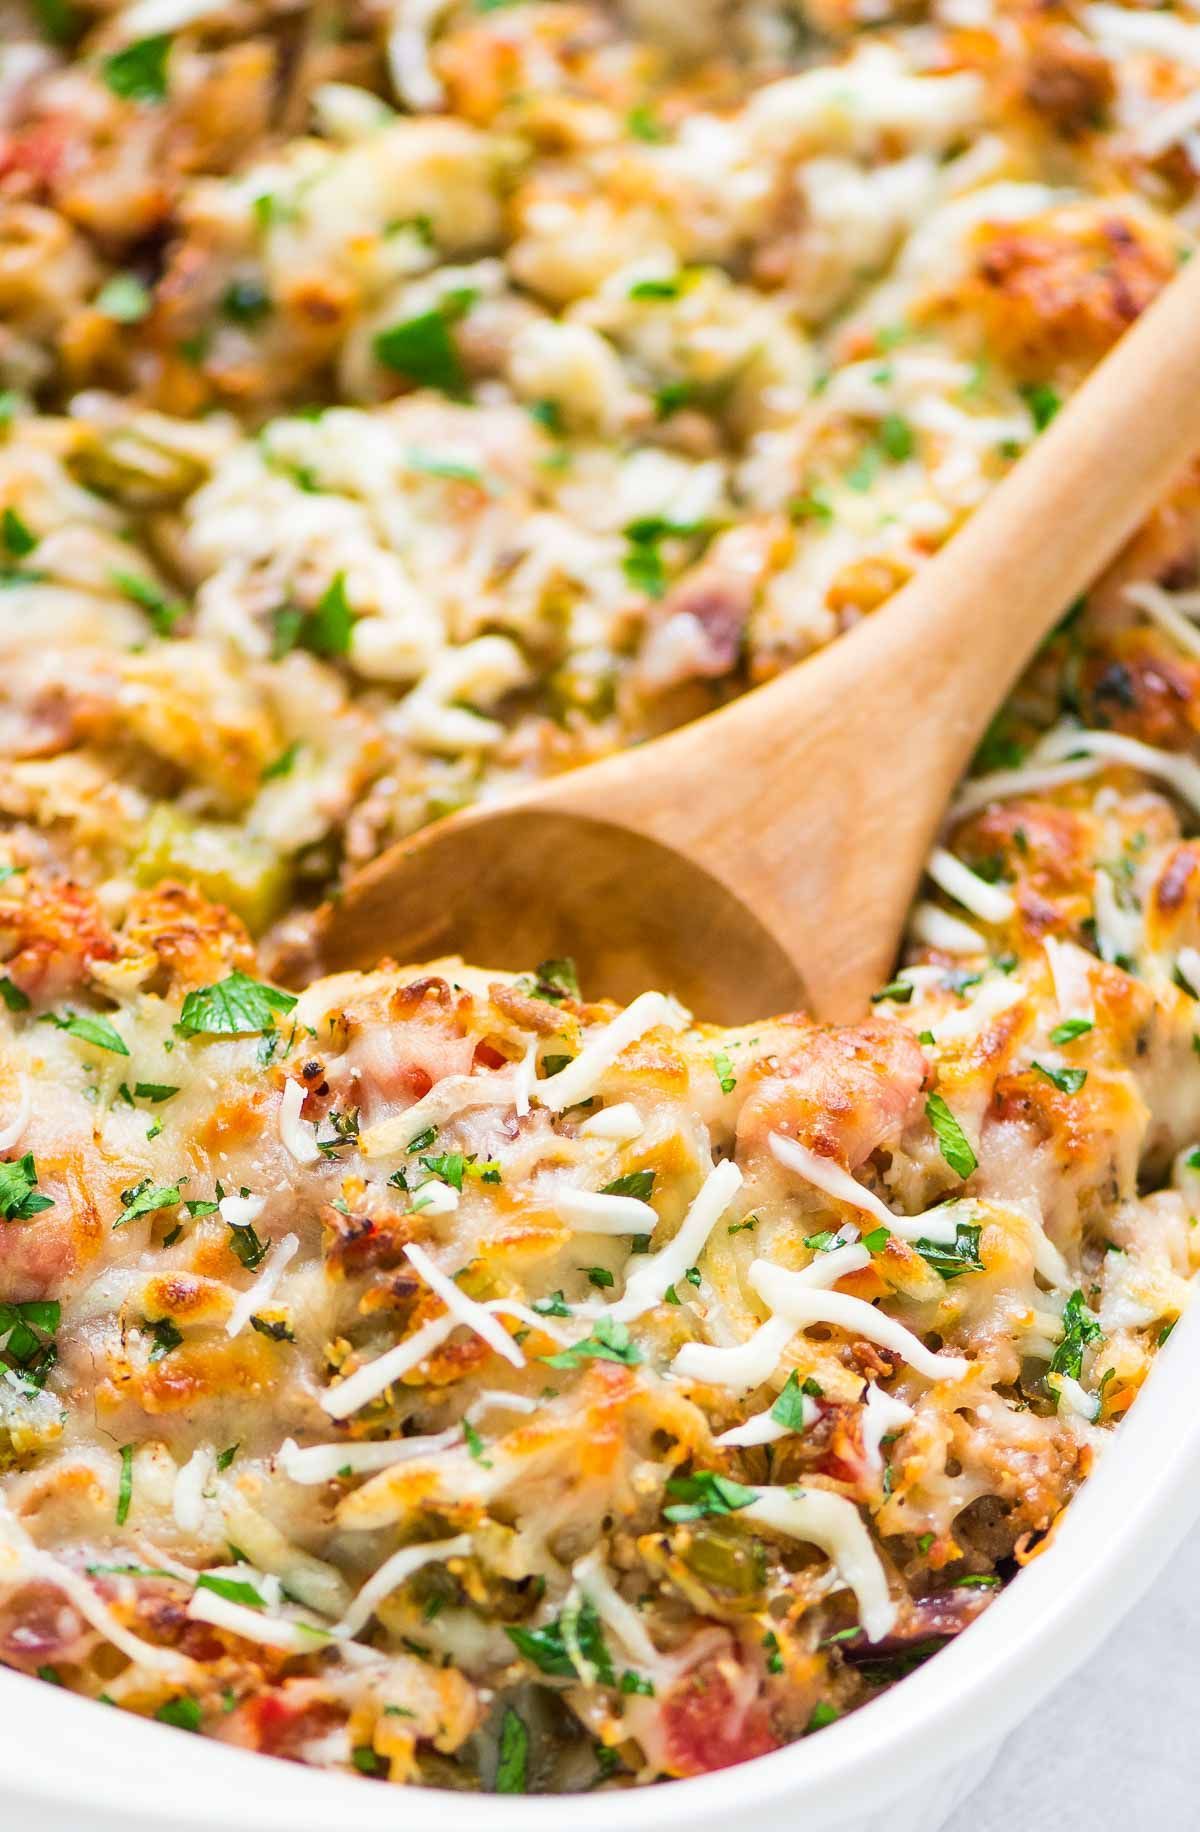 Healthy Spaghetti Squash Casserole with ground turkey, tomatoes and Italian spices